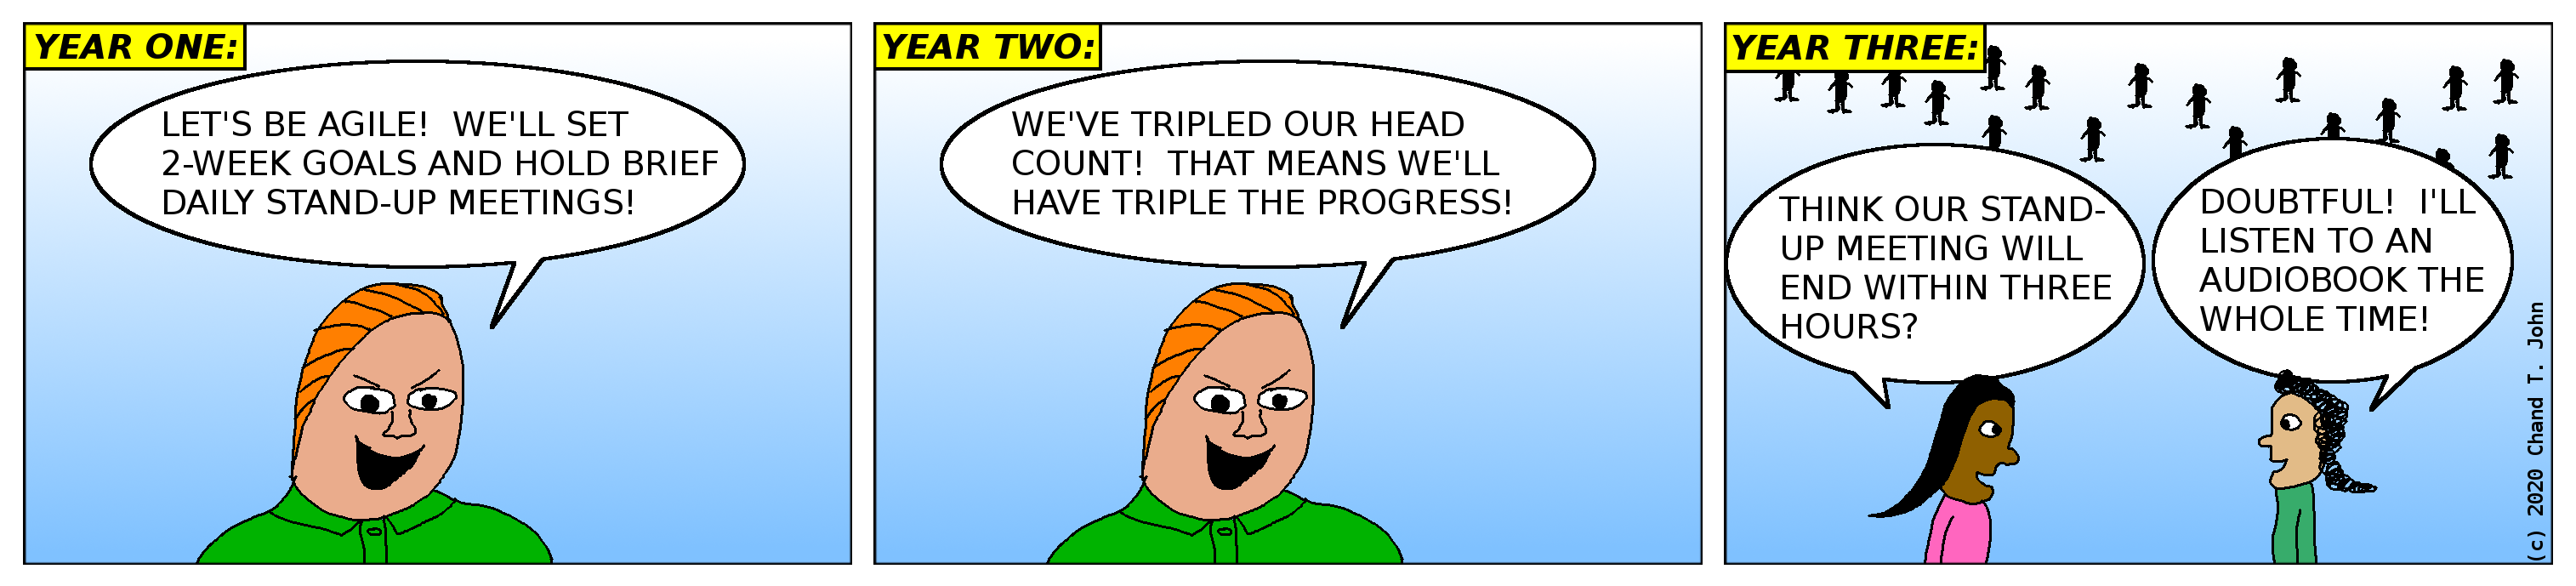 Comic. Year 1: manager says, "Let's be agile! We'll set 2-week goals and hold brief daily stand-up meetings!" Year 2: manager says, "We've tripled our head count! That means we'll have triple the progress!" Year 3: engineer says, "Think our stand-up meeting will end in three ours?" Other engineer says, "Doubtful! I'll listen to an audiobook the whole time!"